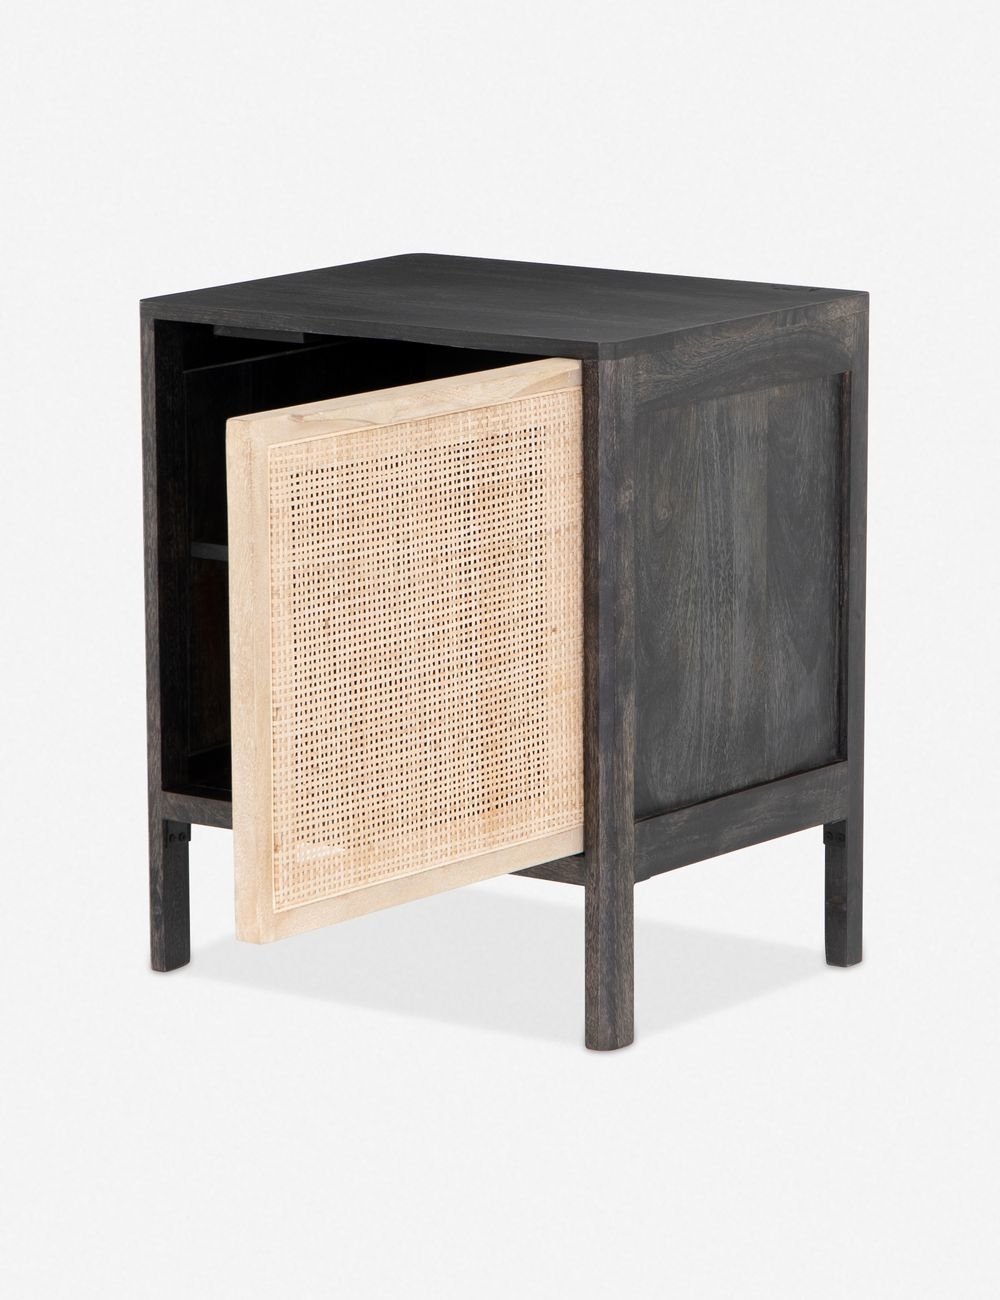 Hnnah Right Nightstand, Black Wash - Image 1